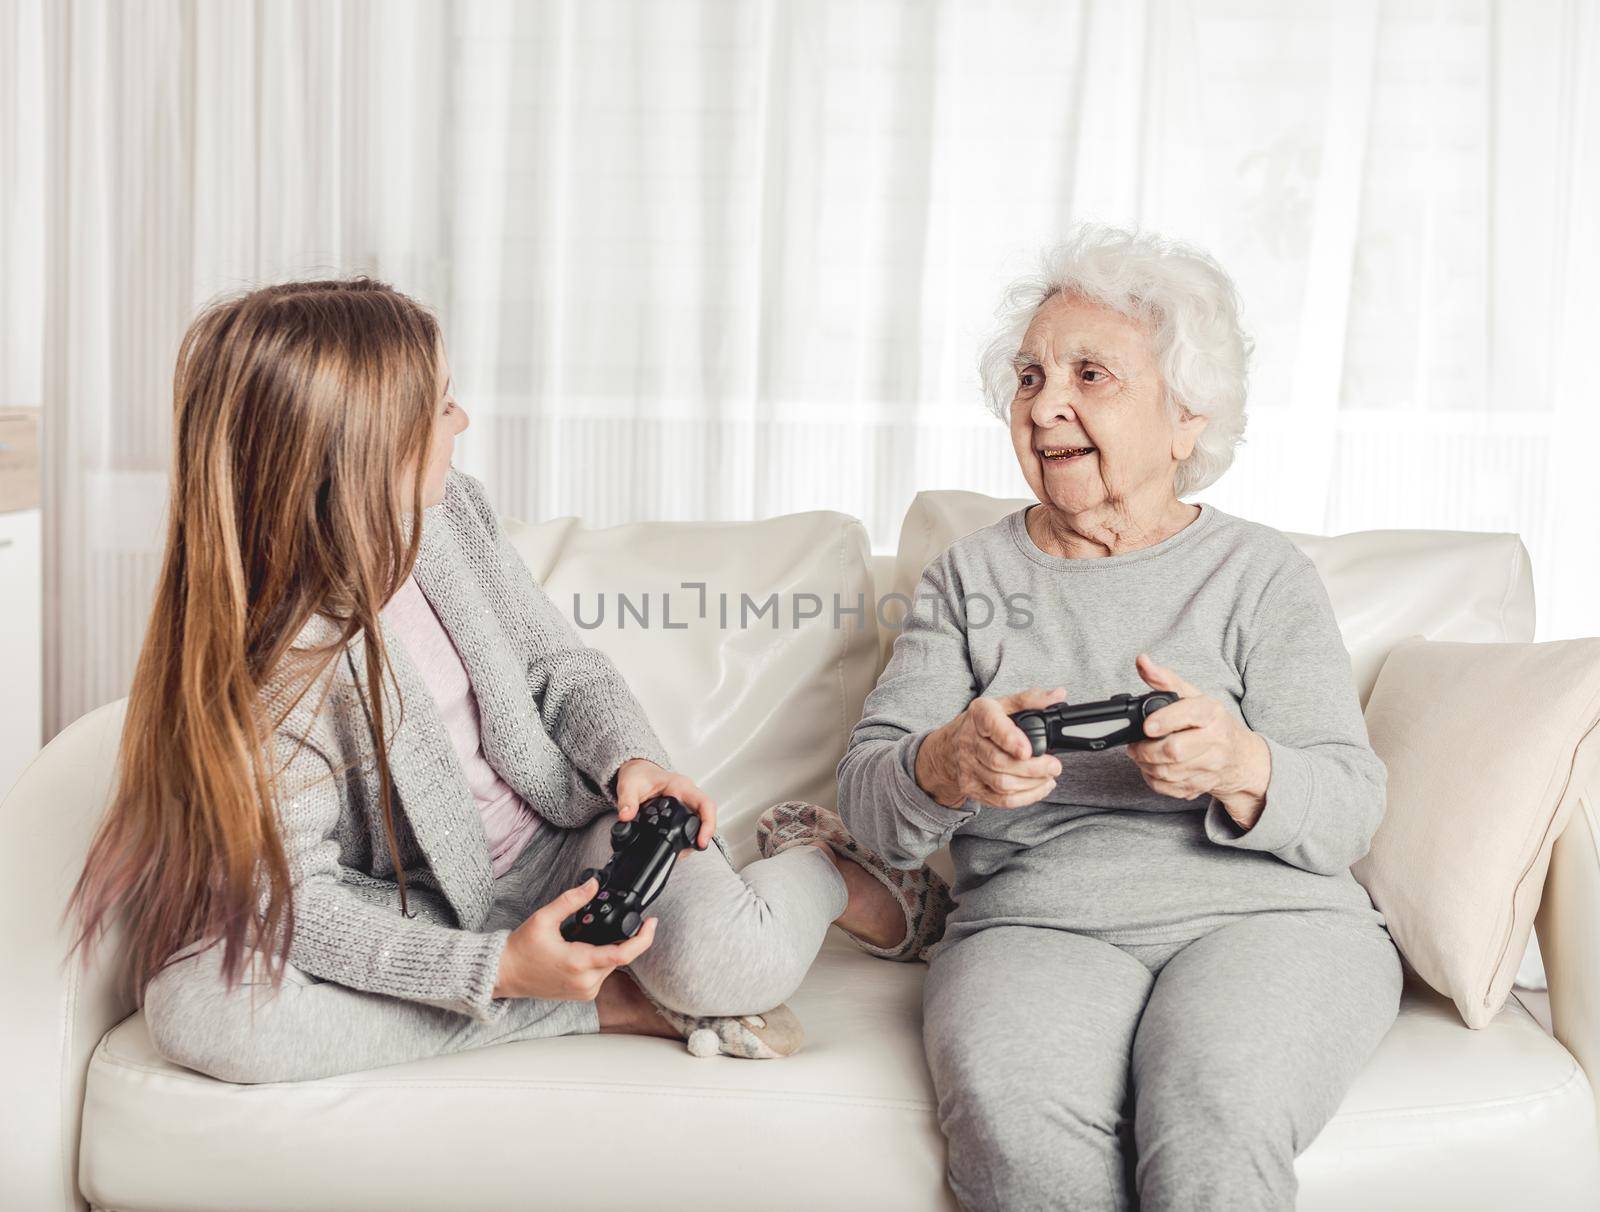 Grandmother with granddaughter playing games together with gamepads